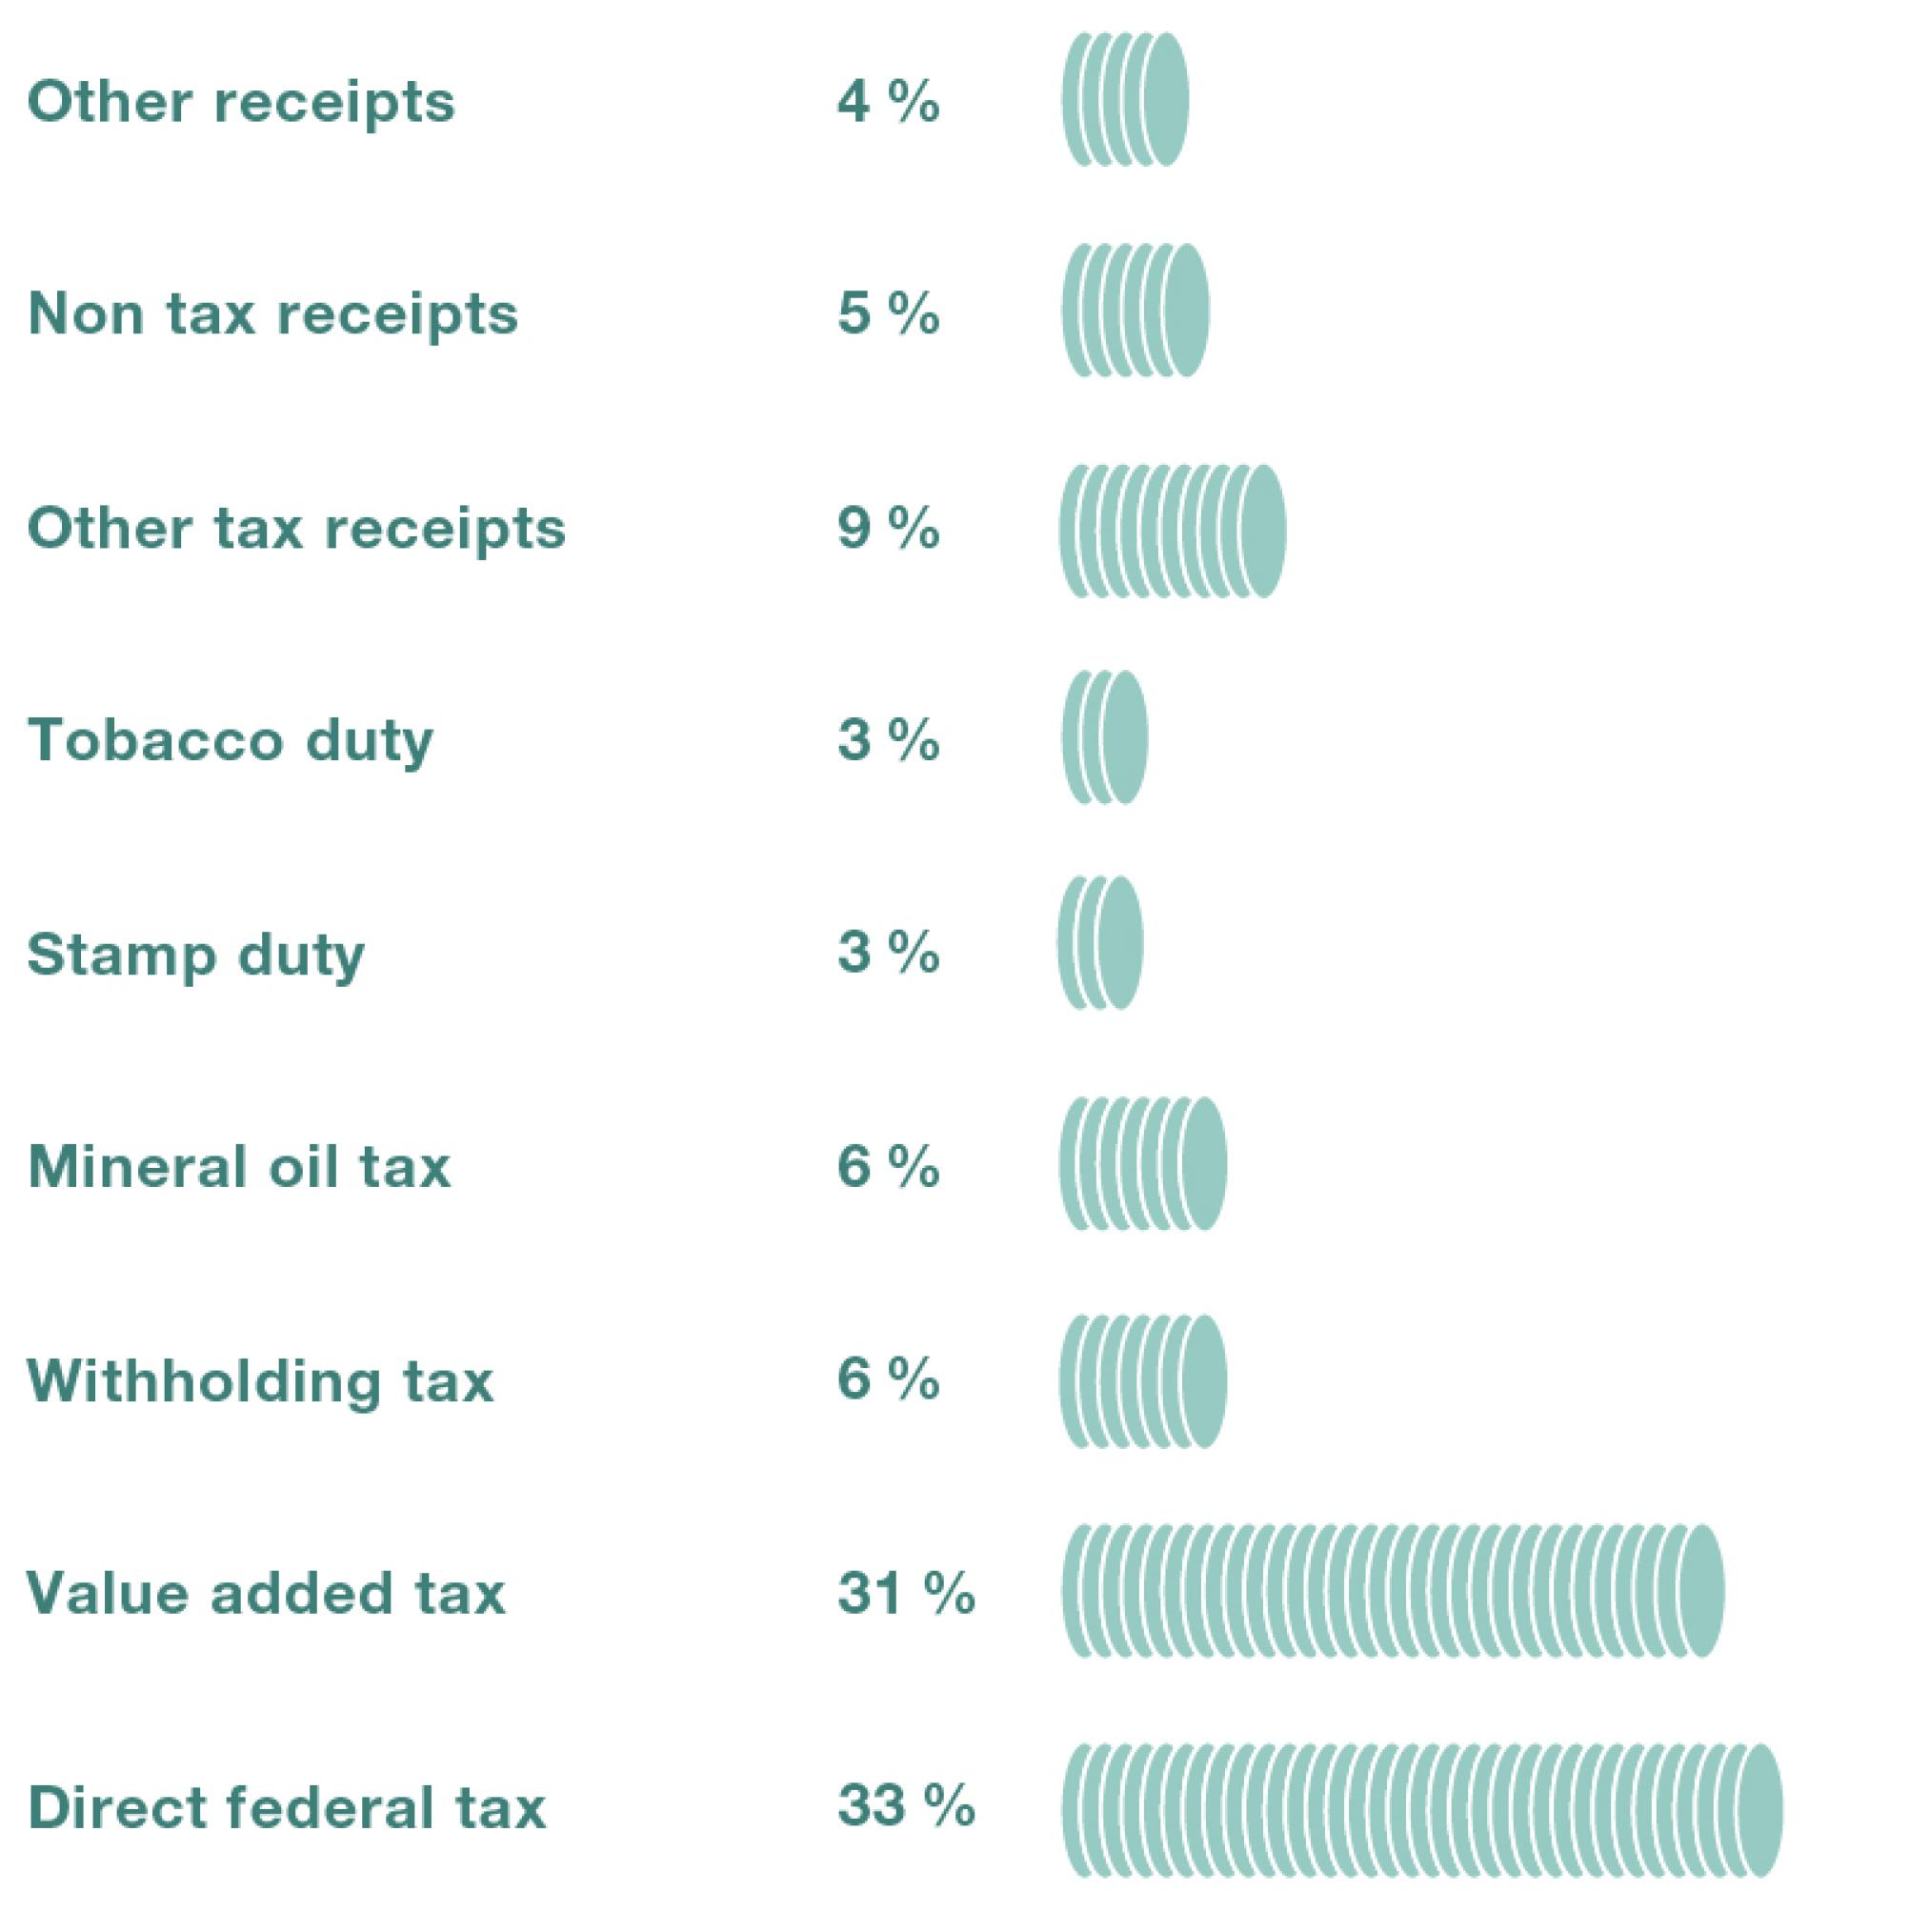 Federal revenue 2021 was devided up as follows. Direct federal tax: 33%  Value added tax: 31% Withholding tax: 6% Mineral oil tax: 6% Tobacco duty: 3% And other tax revenues: 4%